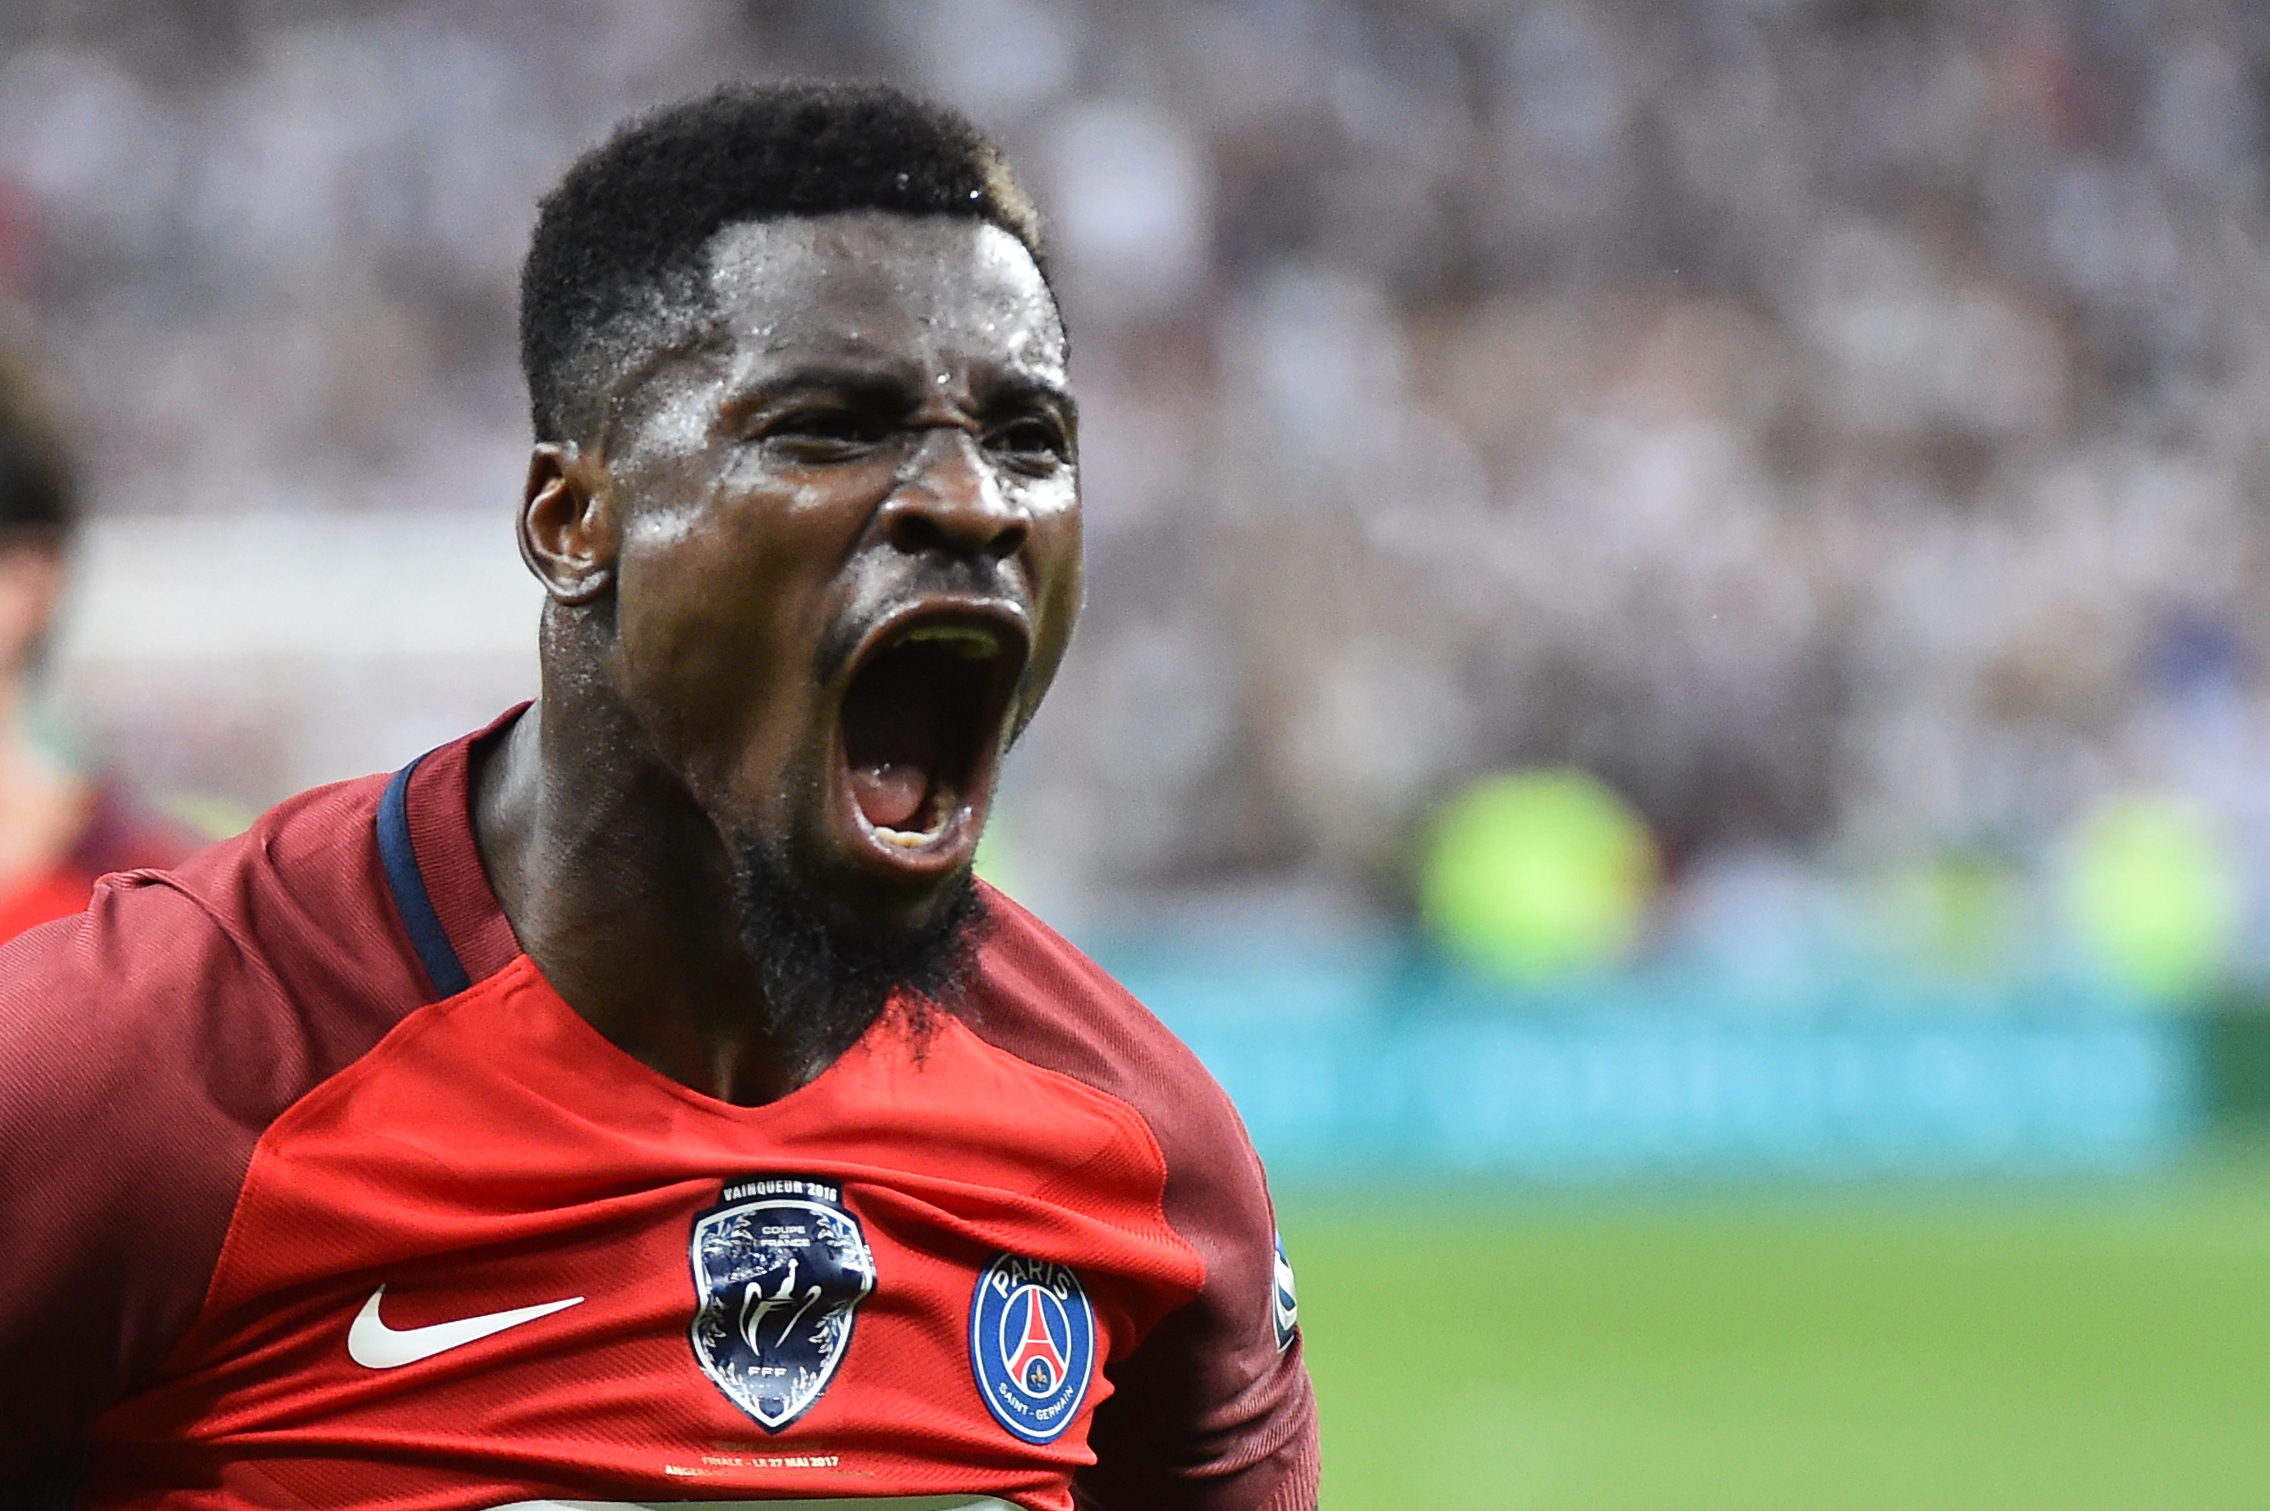 Paris Saint-Germain's Ivorian defender Serge Aurier reacts after a goal  during the French Cup final football match between Paris Saint-Germain (PSG) and Angers (SCO) on May 27, 2017, at the Stade de France in Saint-Denis, north of Paris. / AFP PHOTO / JEAN-FRANCOIS MONIER        (Photo credit should read JEAN-FRANCOIS MONIER/AFP/Getty Images)